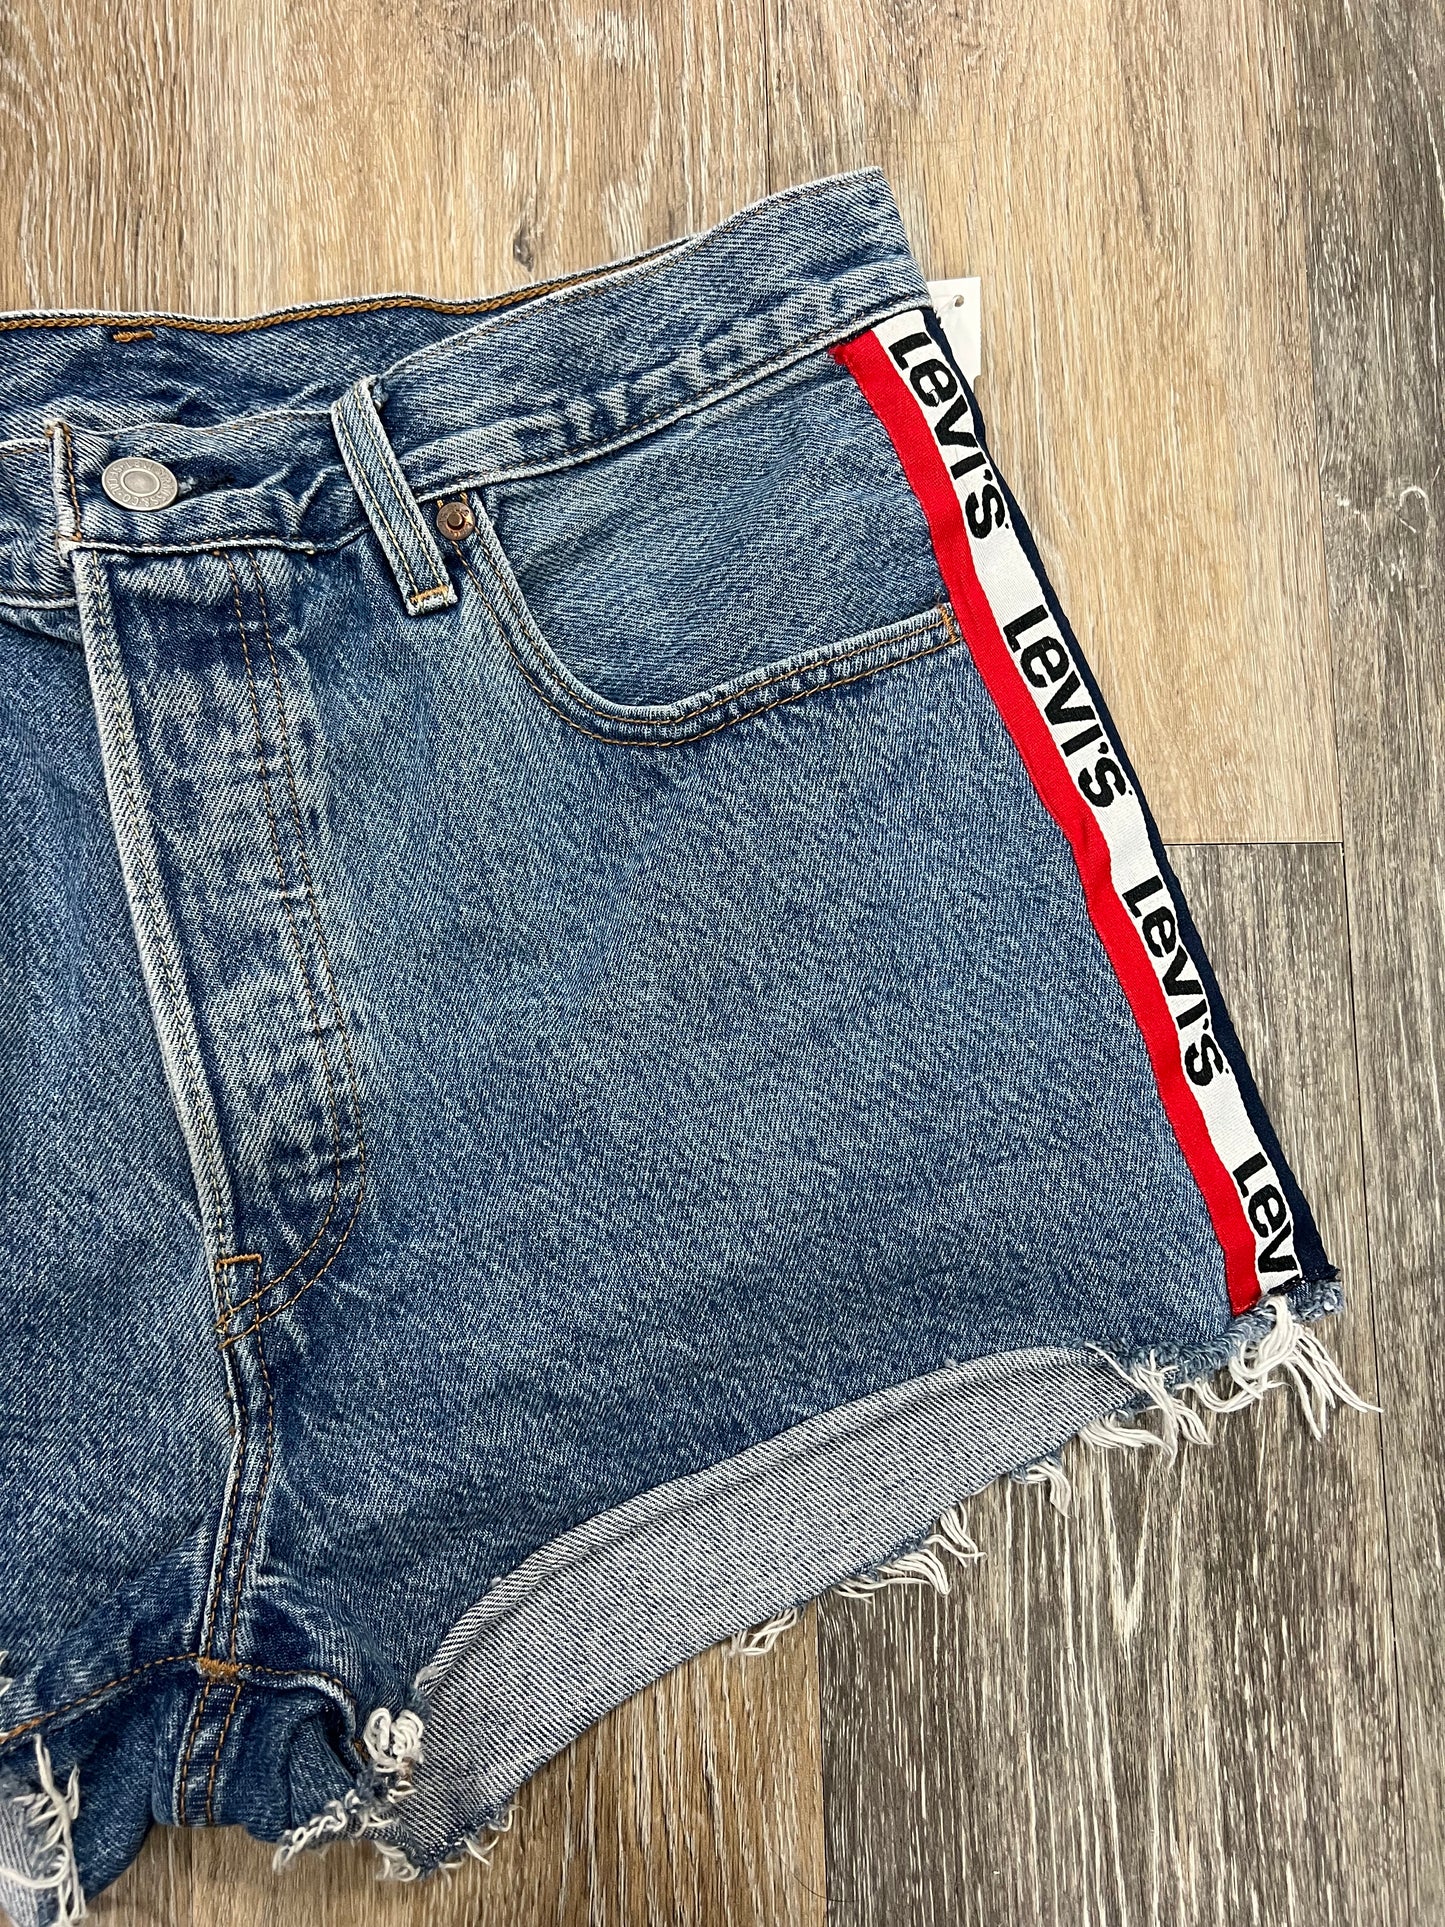 Shorts By Levis  Size: 12/31